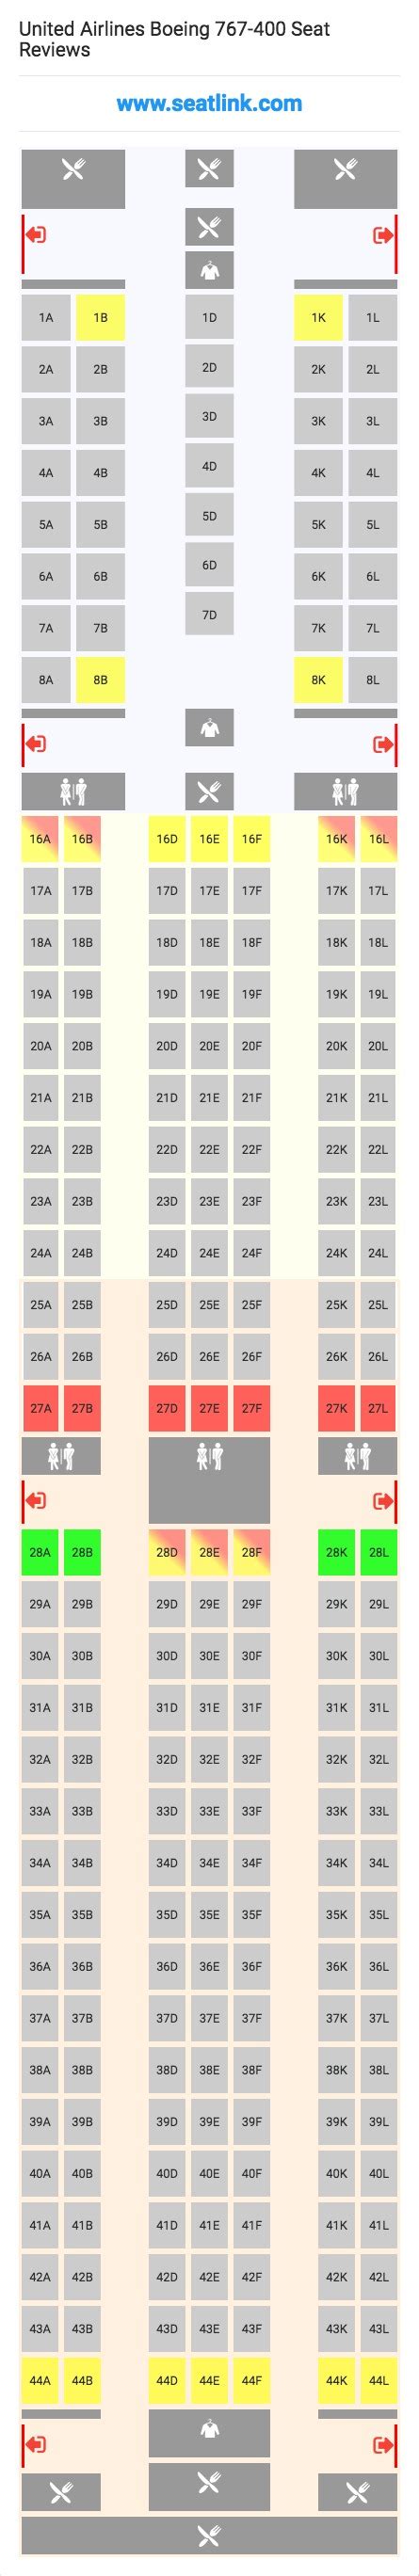 United Airlines Seat Map 767 300 Two Birds Home